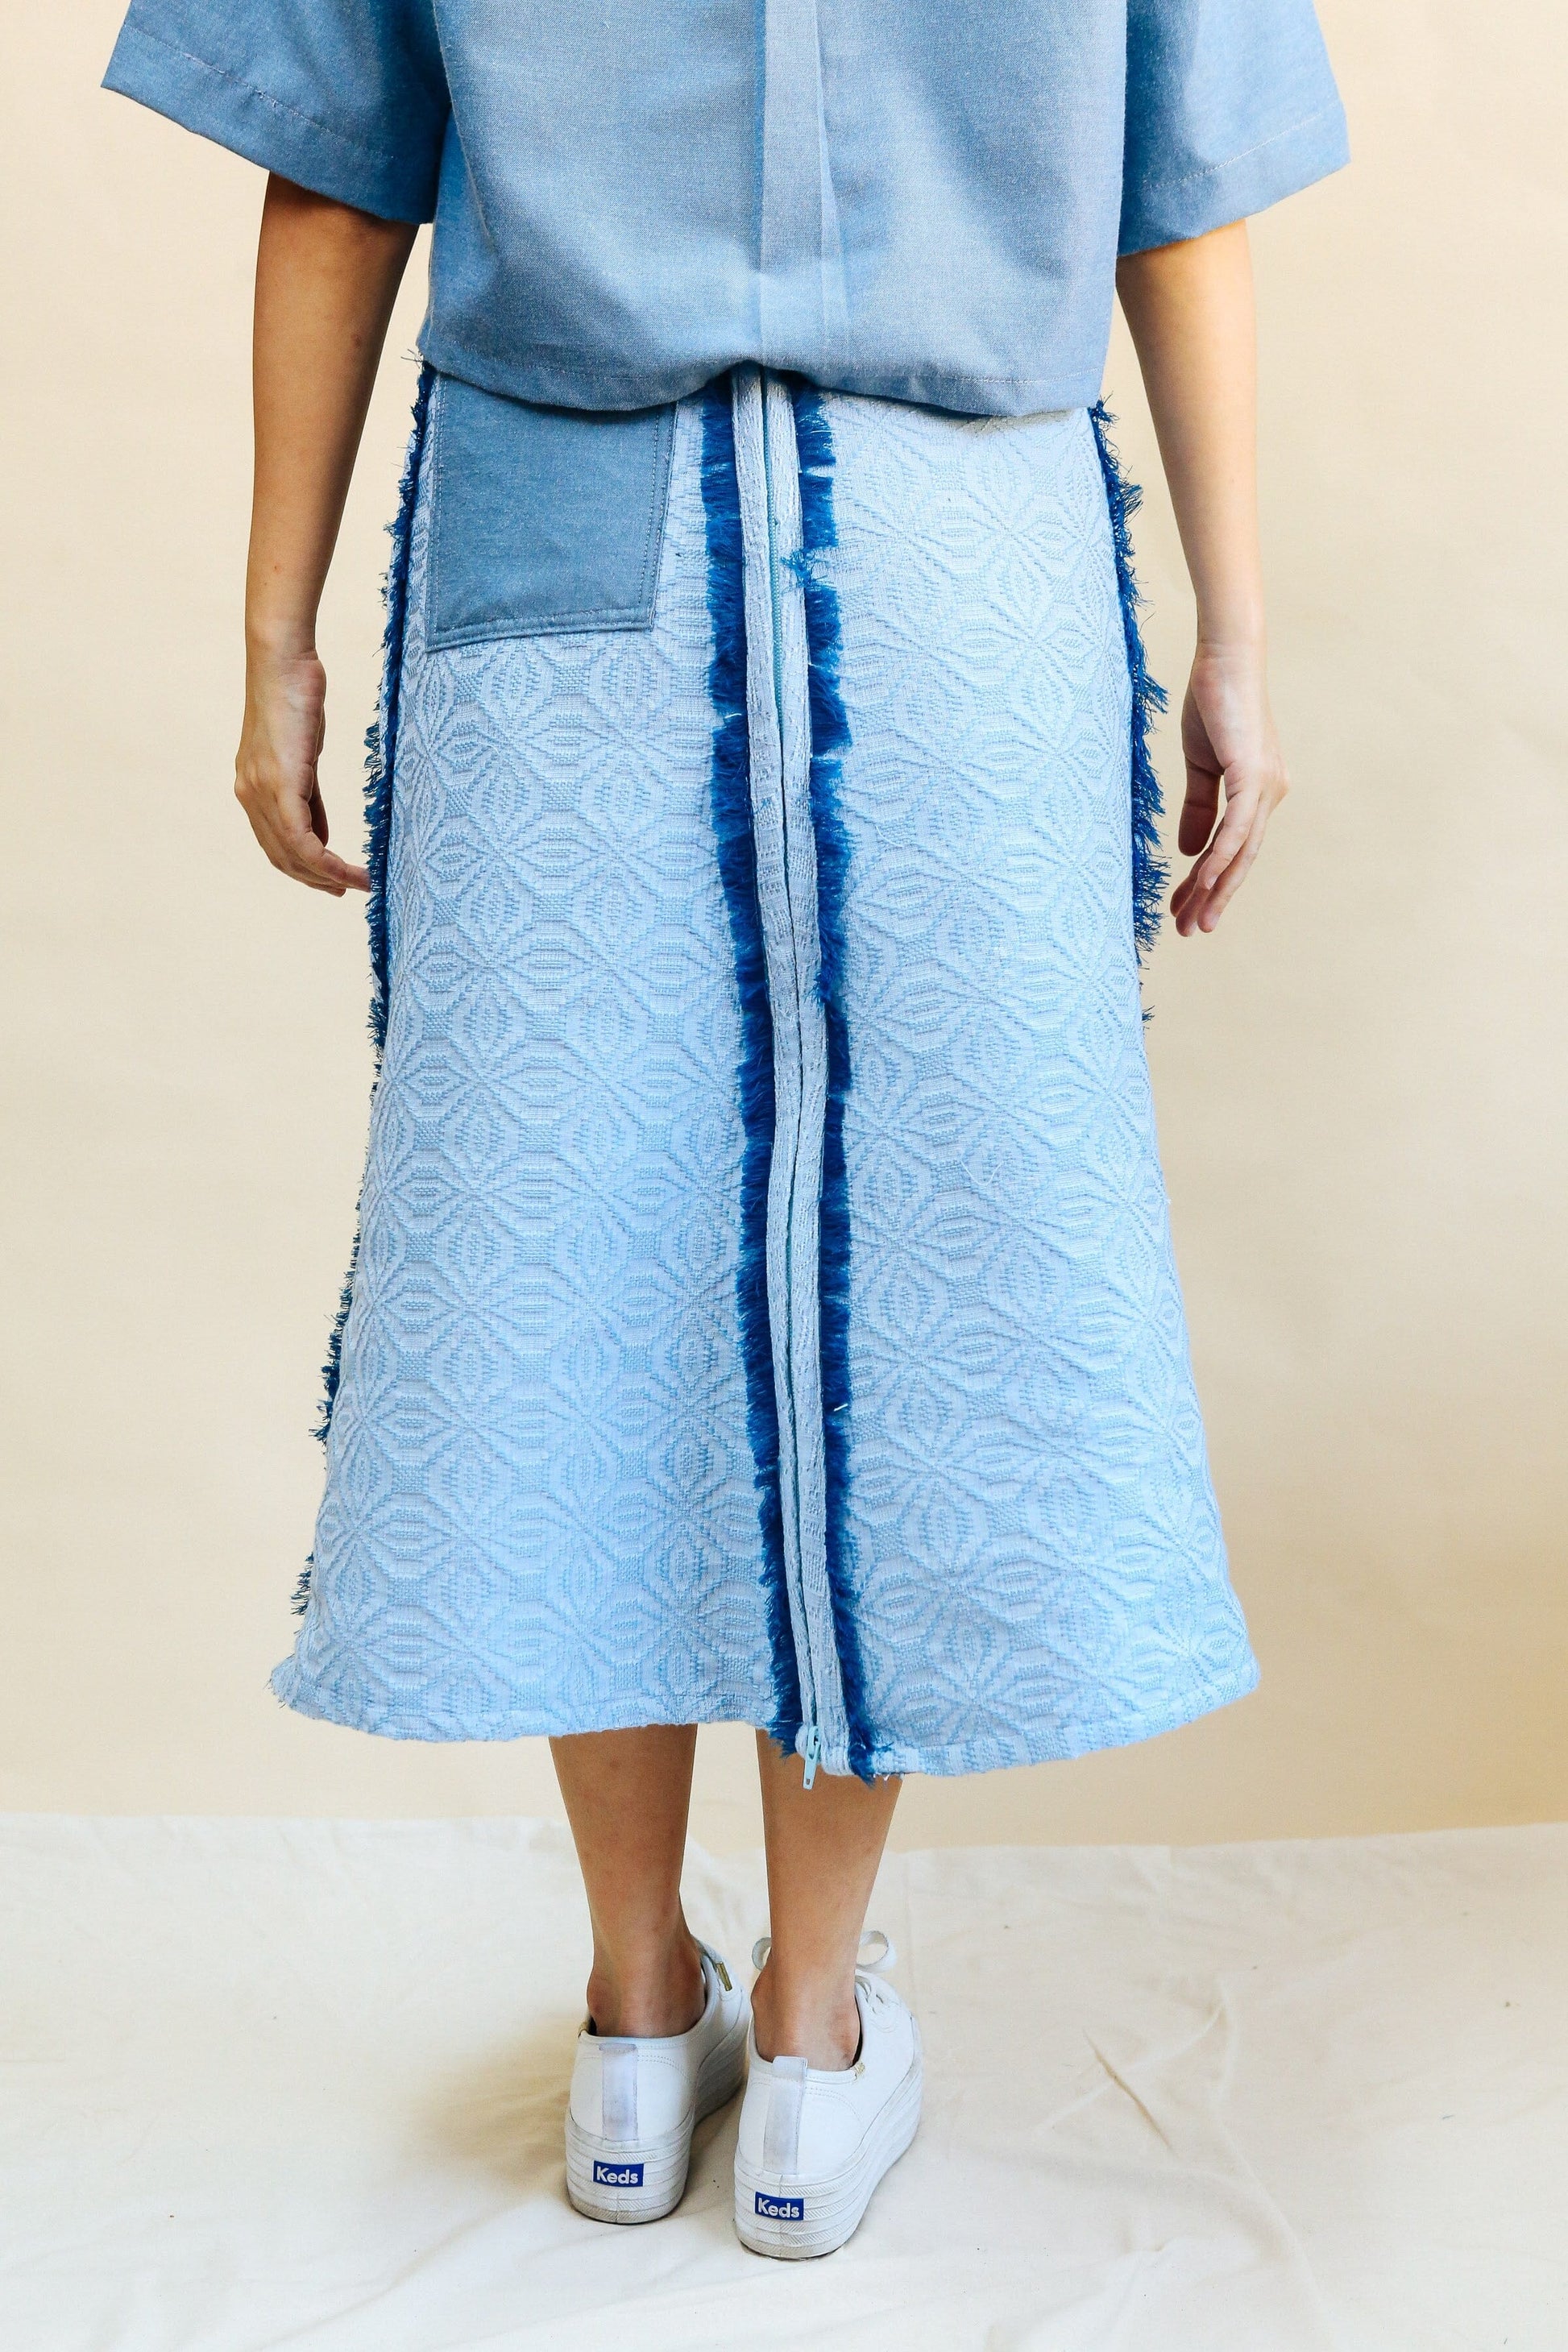 [Ready Today] 4-Way A-Line Skirt Chambray & Binetwagan Fashion Rags2Riches